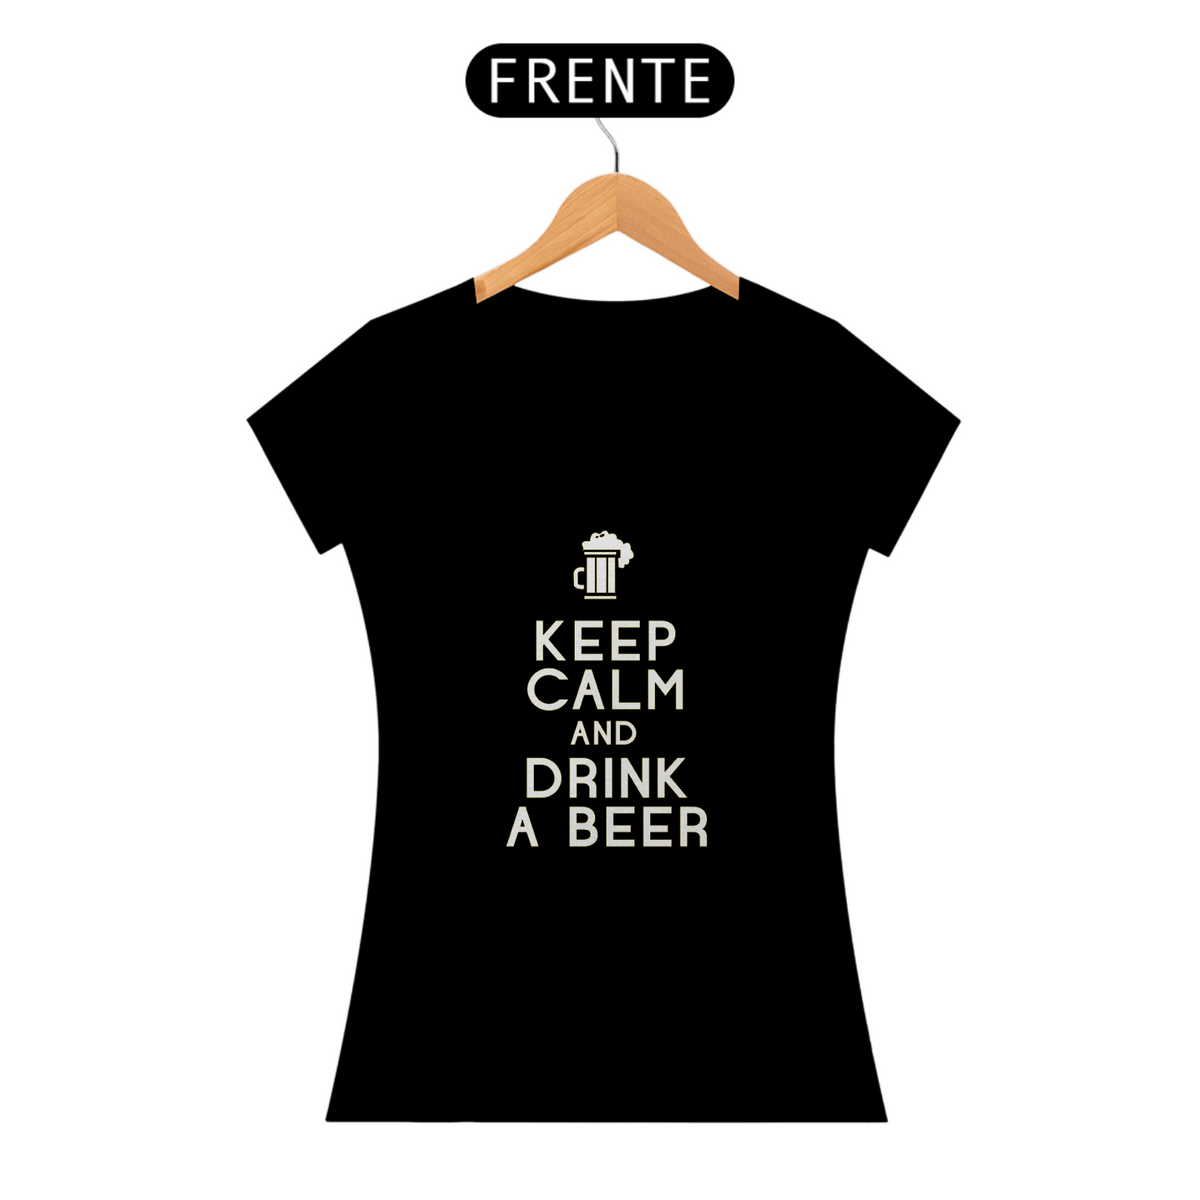 Nome do produto: Keep calm and drink a beer - Baby Look